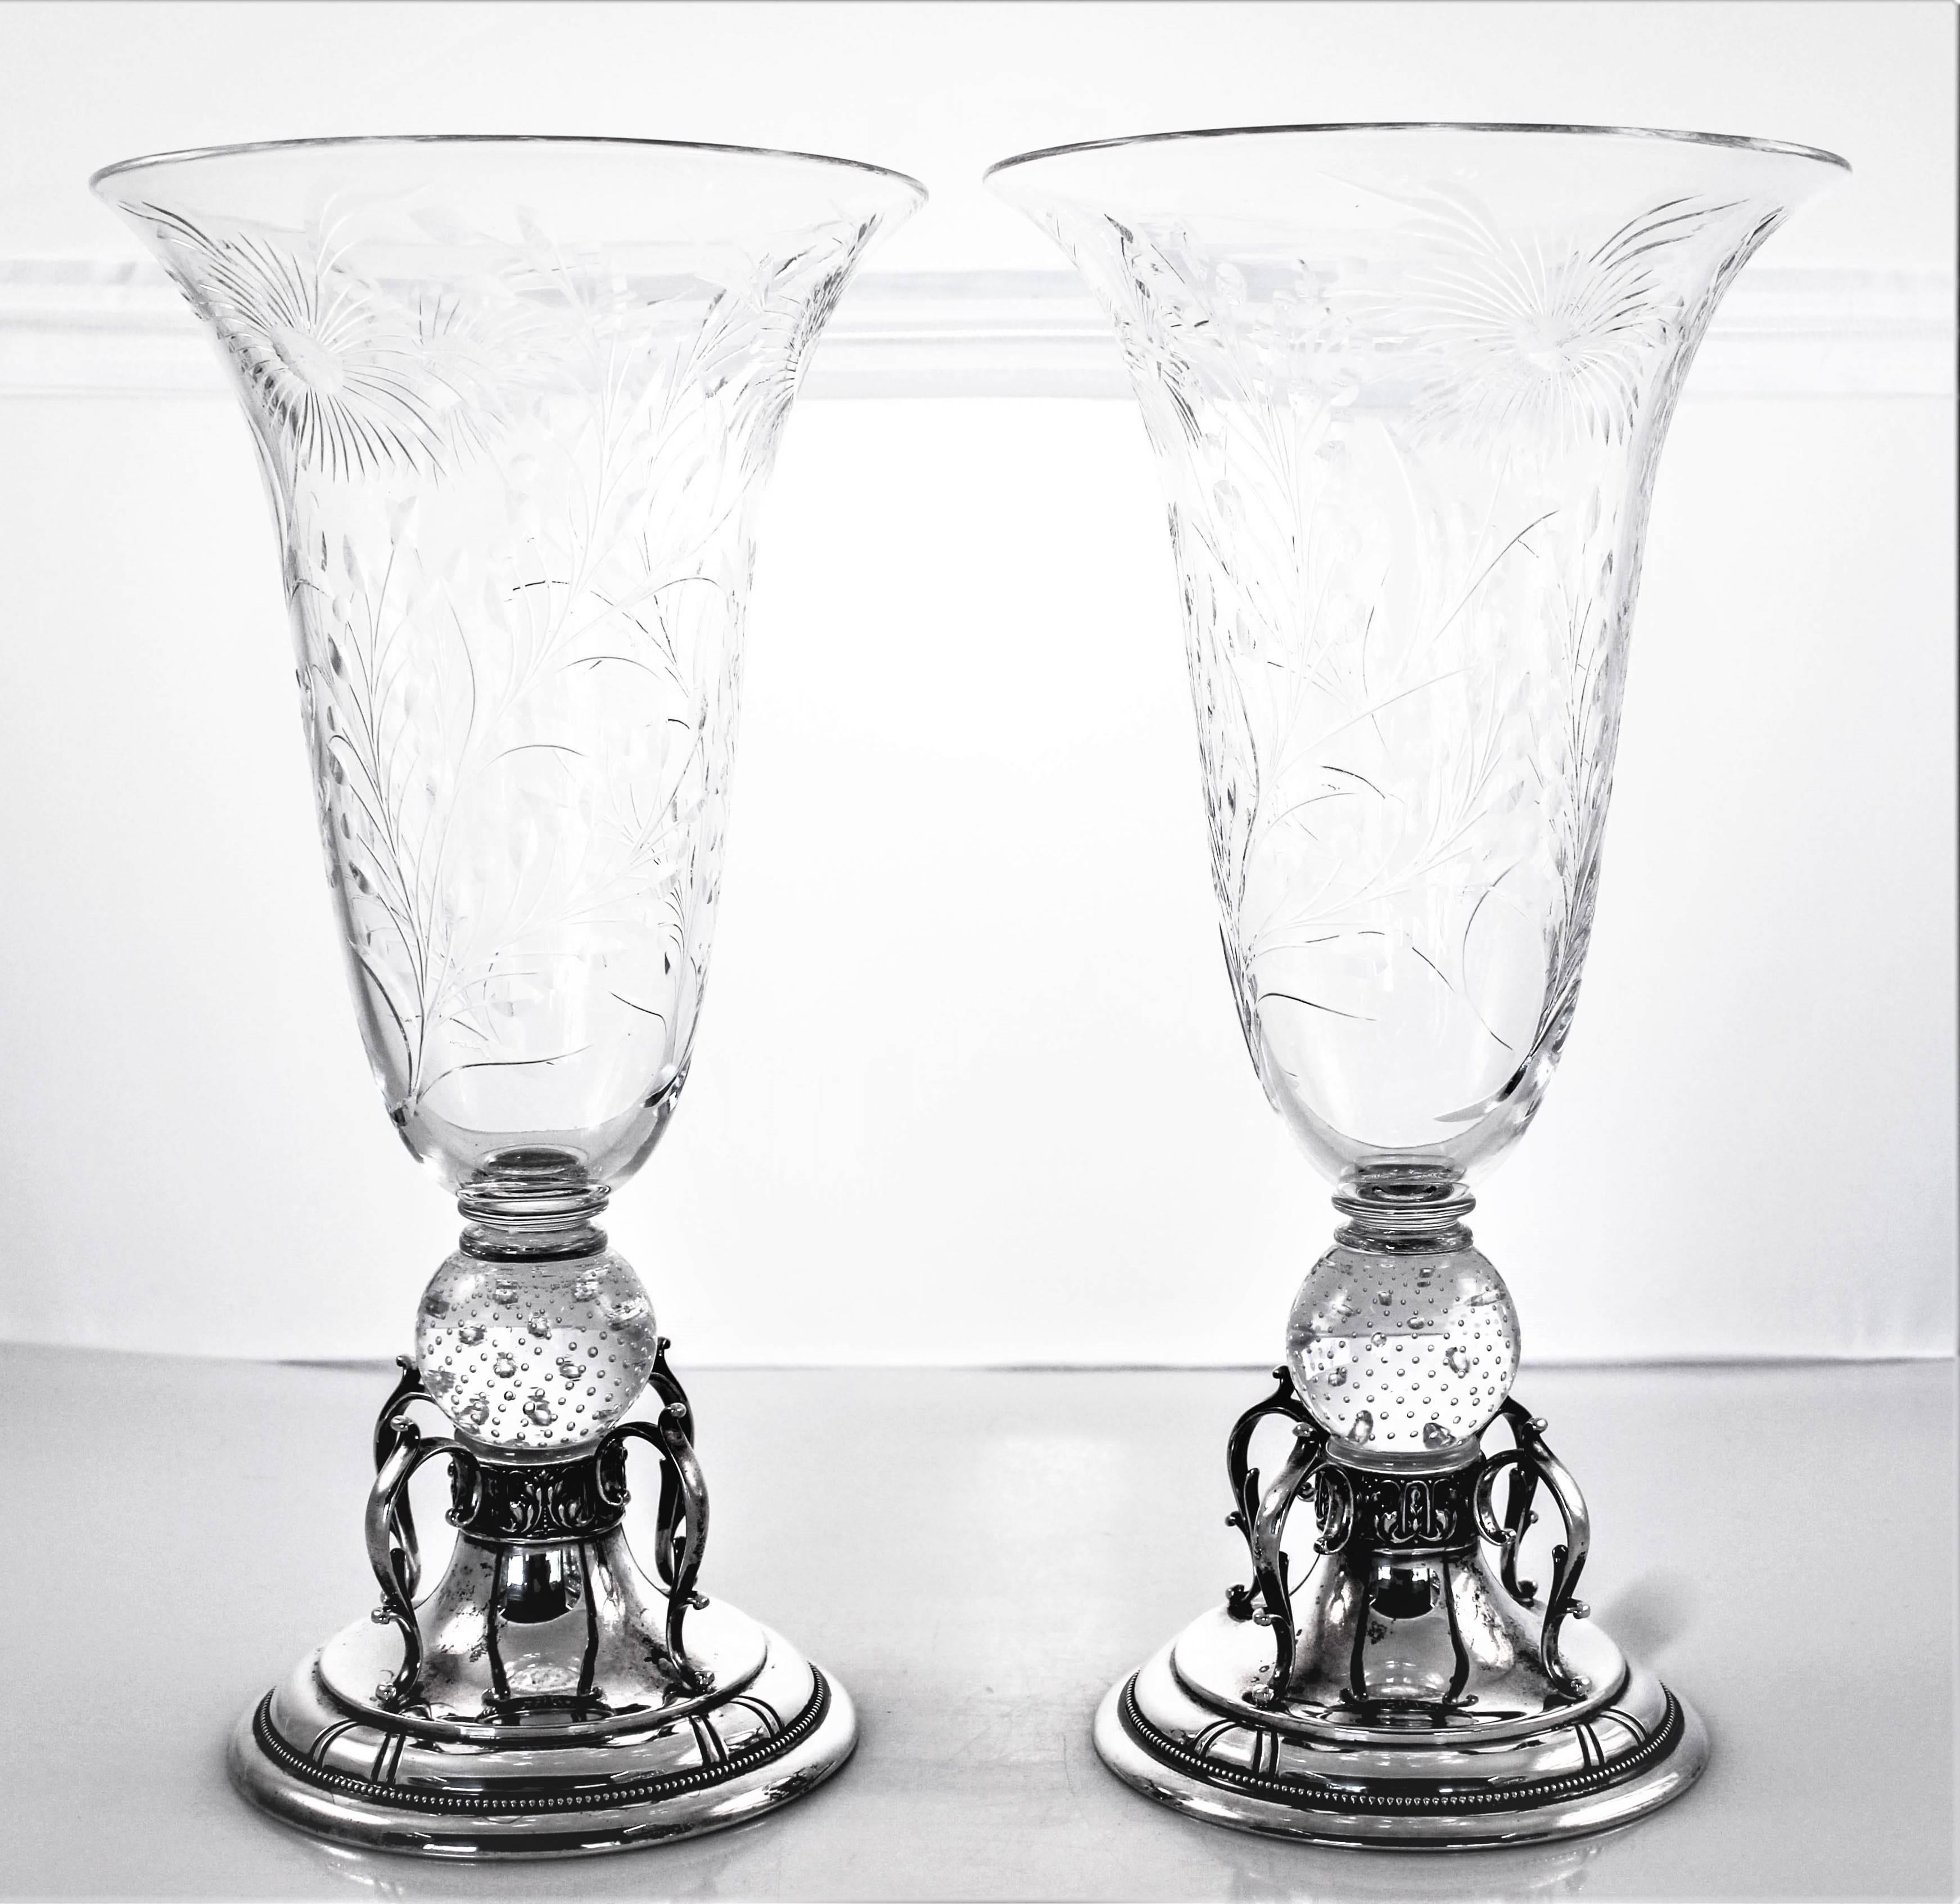 The magnificent combination of silver and crystal; Reed and Barton and Steuben teamed up to create these treasures. The base of the candlesticks are sterling with four curved designs that loop out onto an Art Deco design edge. The body is cut